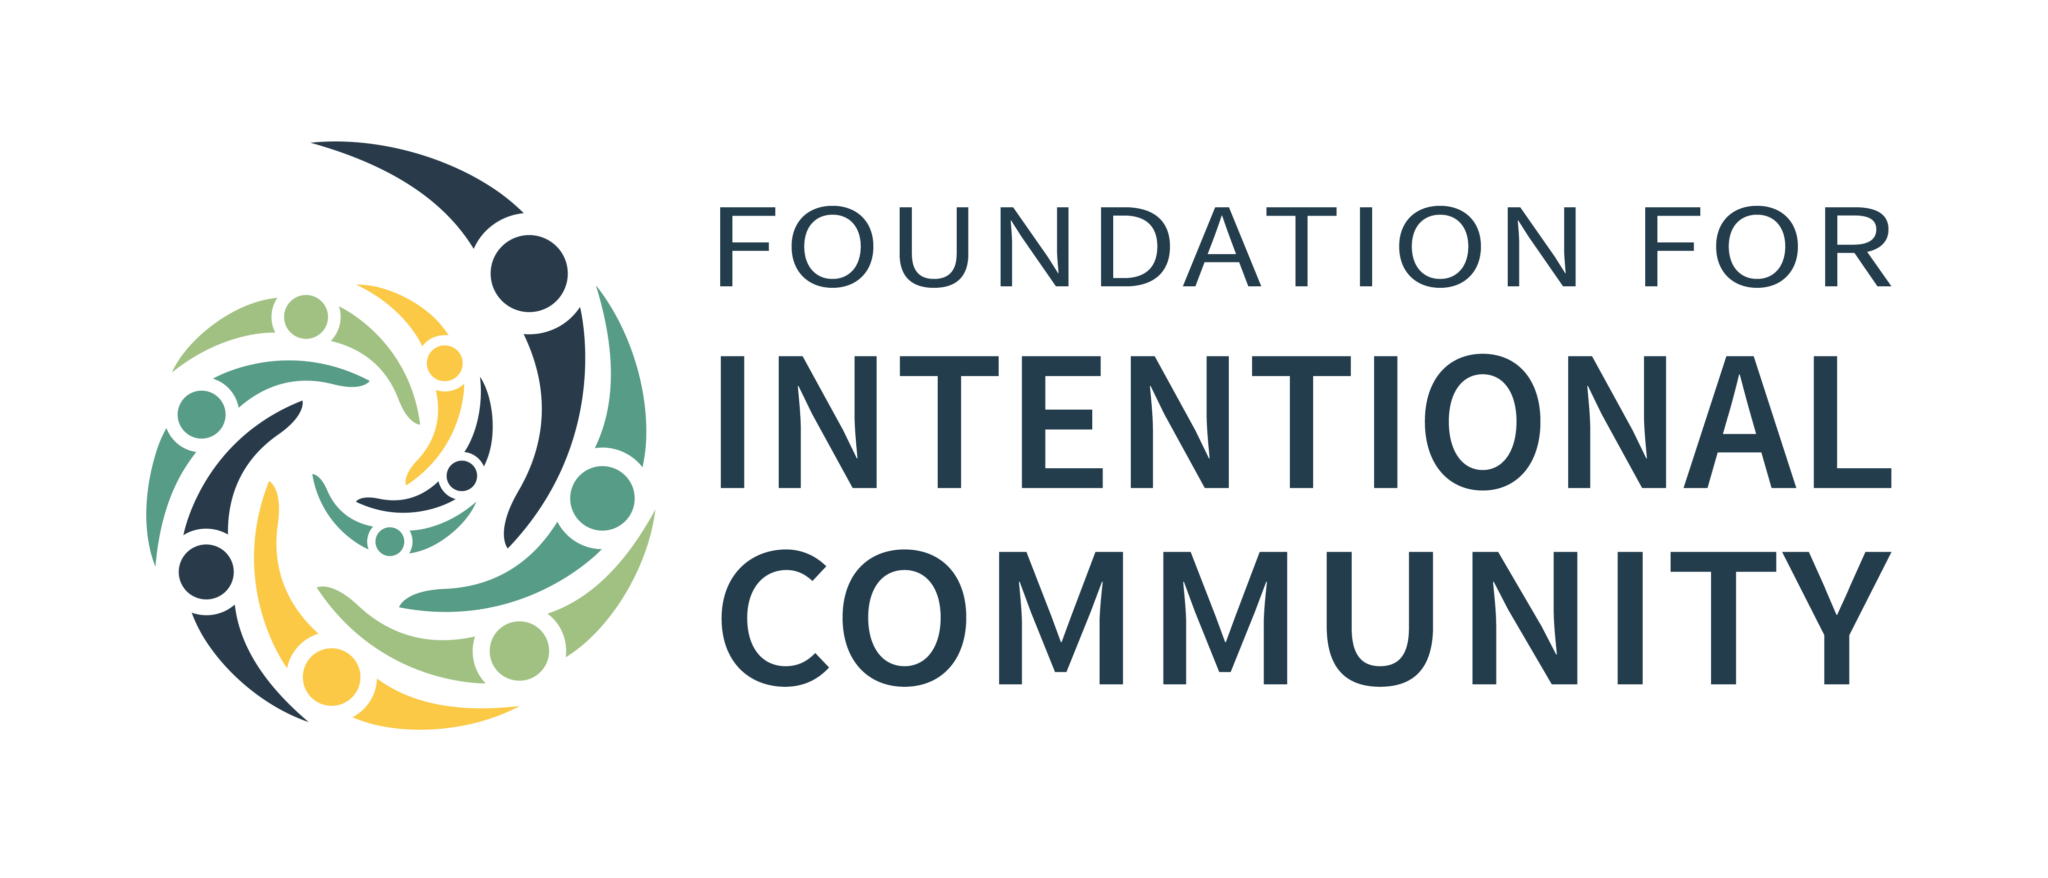 Foundation for Intentional Community - Partner of Sociocracy for All